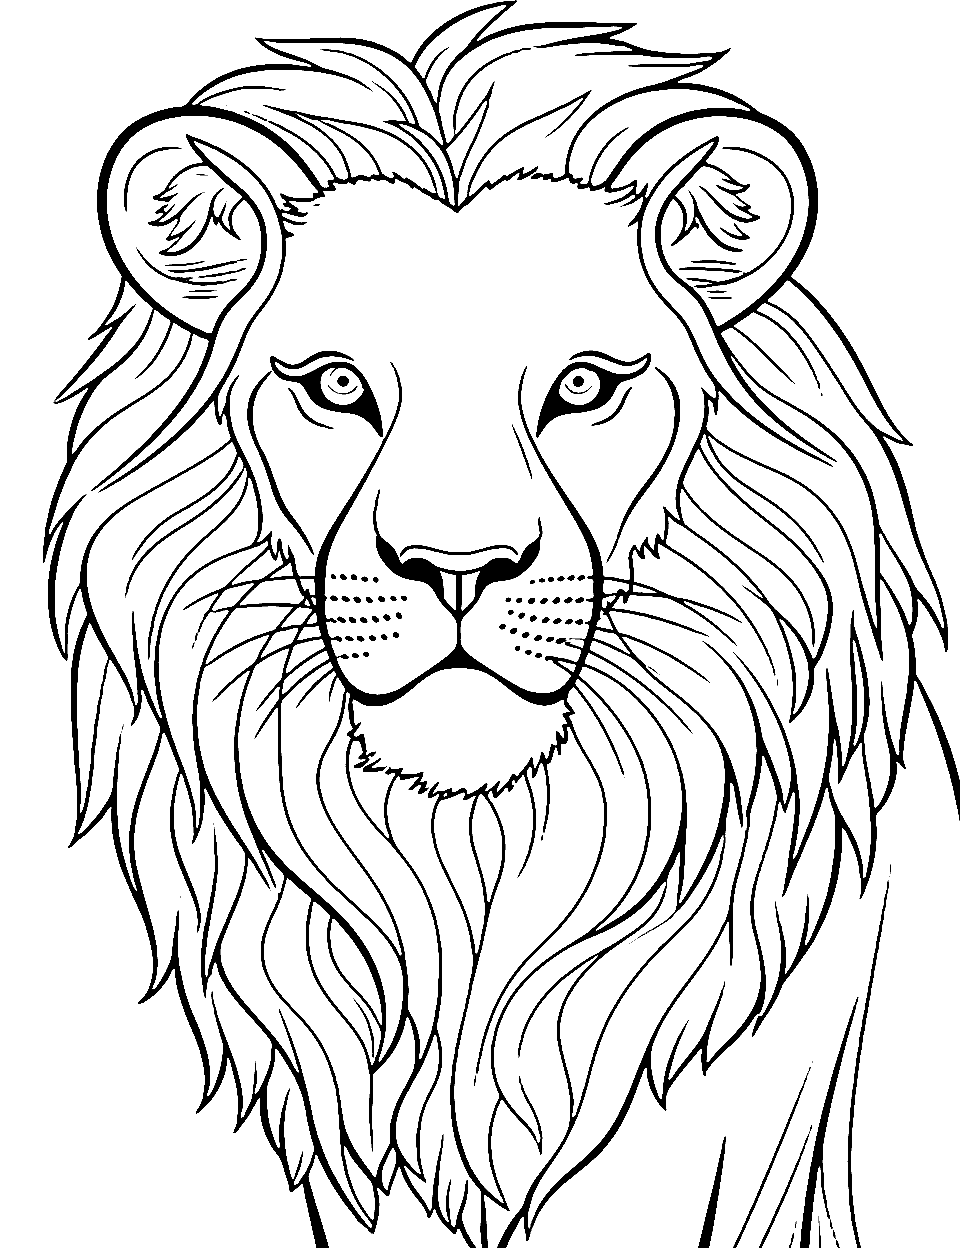 Majestic Lion Head Coloring Page - Close-up of a lion’s head, showing off its majestic mane.